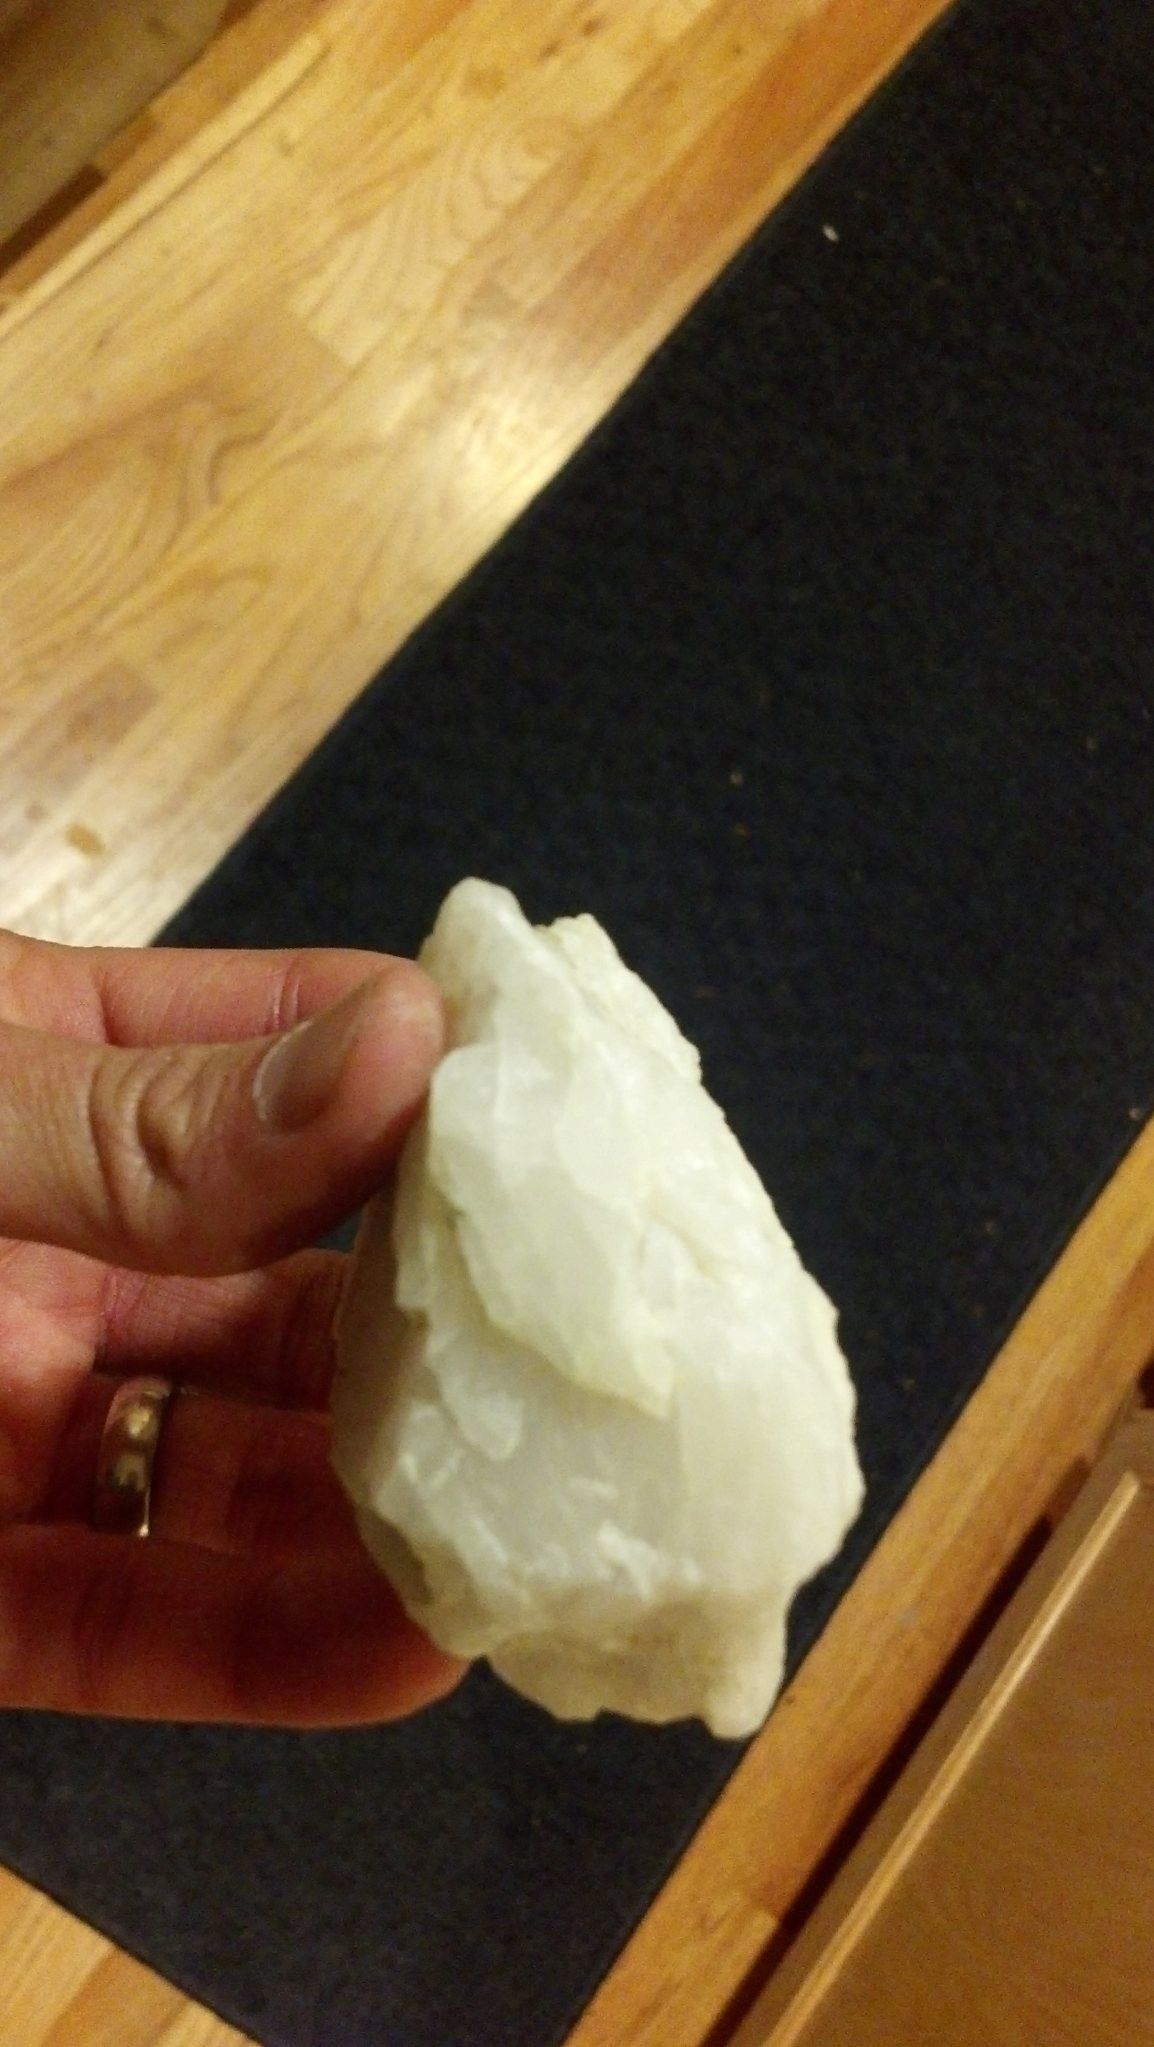 Solid and clean. Found in a backyard with a rock garden. Loose random material from a WA state quarry. Sometimes interesting things end up in your own